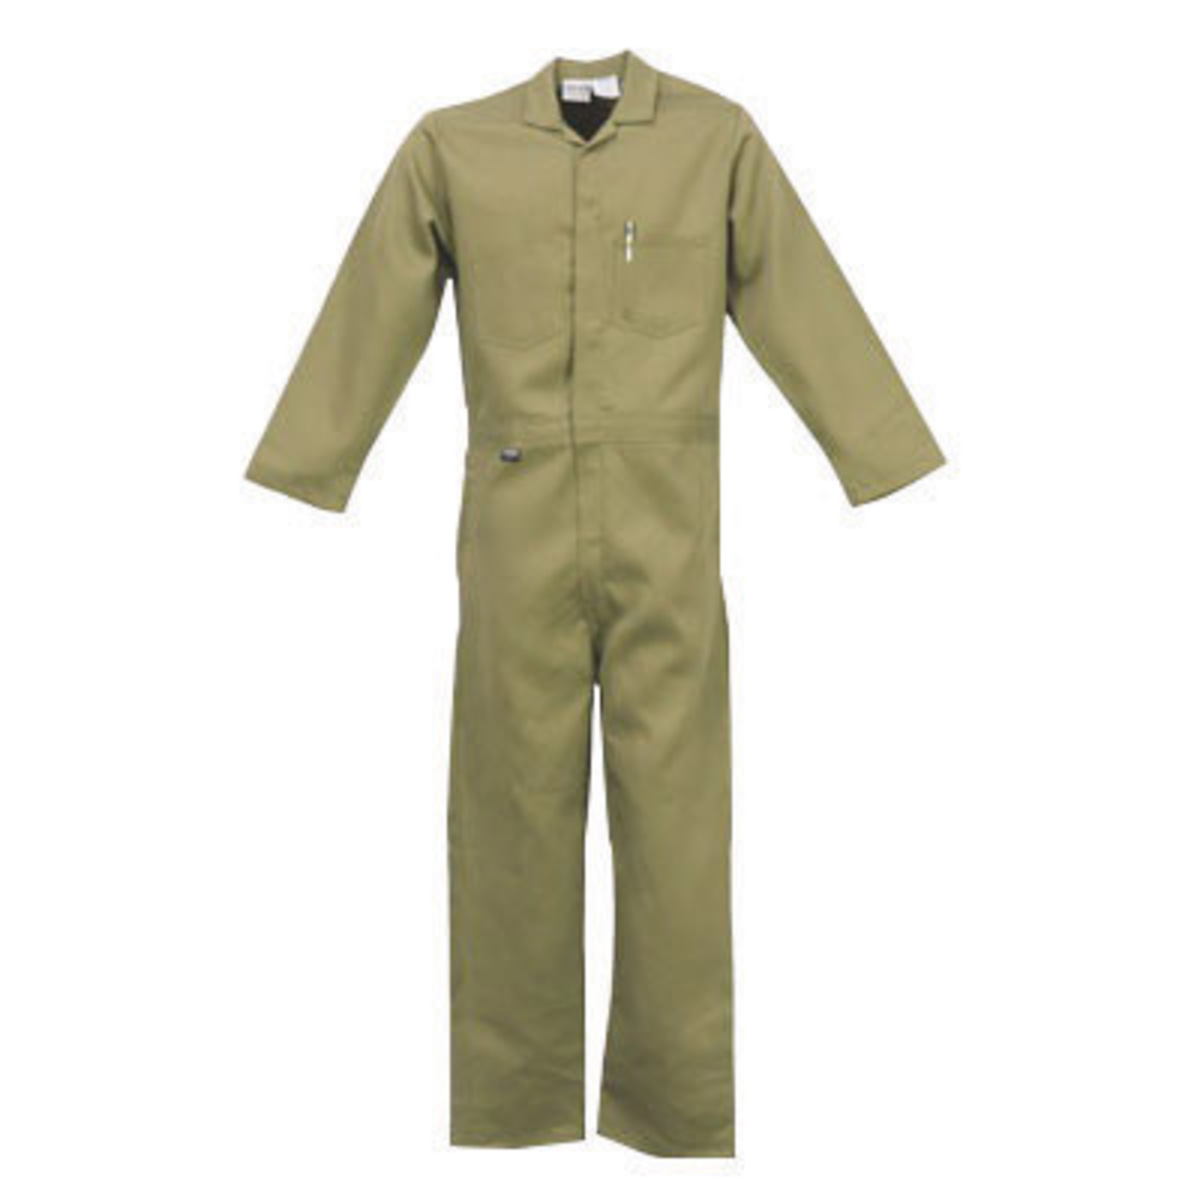 Stanco Safety Products™ Size 4X Tan Indura® UltraSoft® Arc Rated Flame Resistant Coveralls With Front Zipper Closure